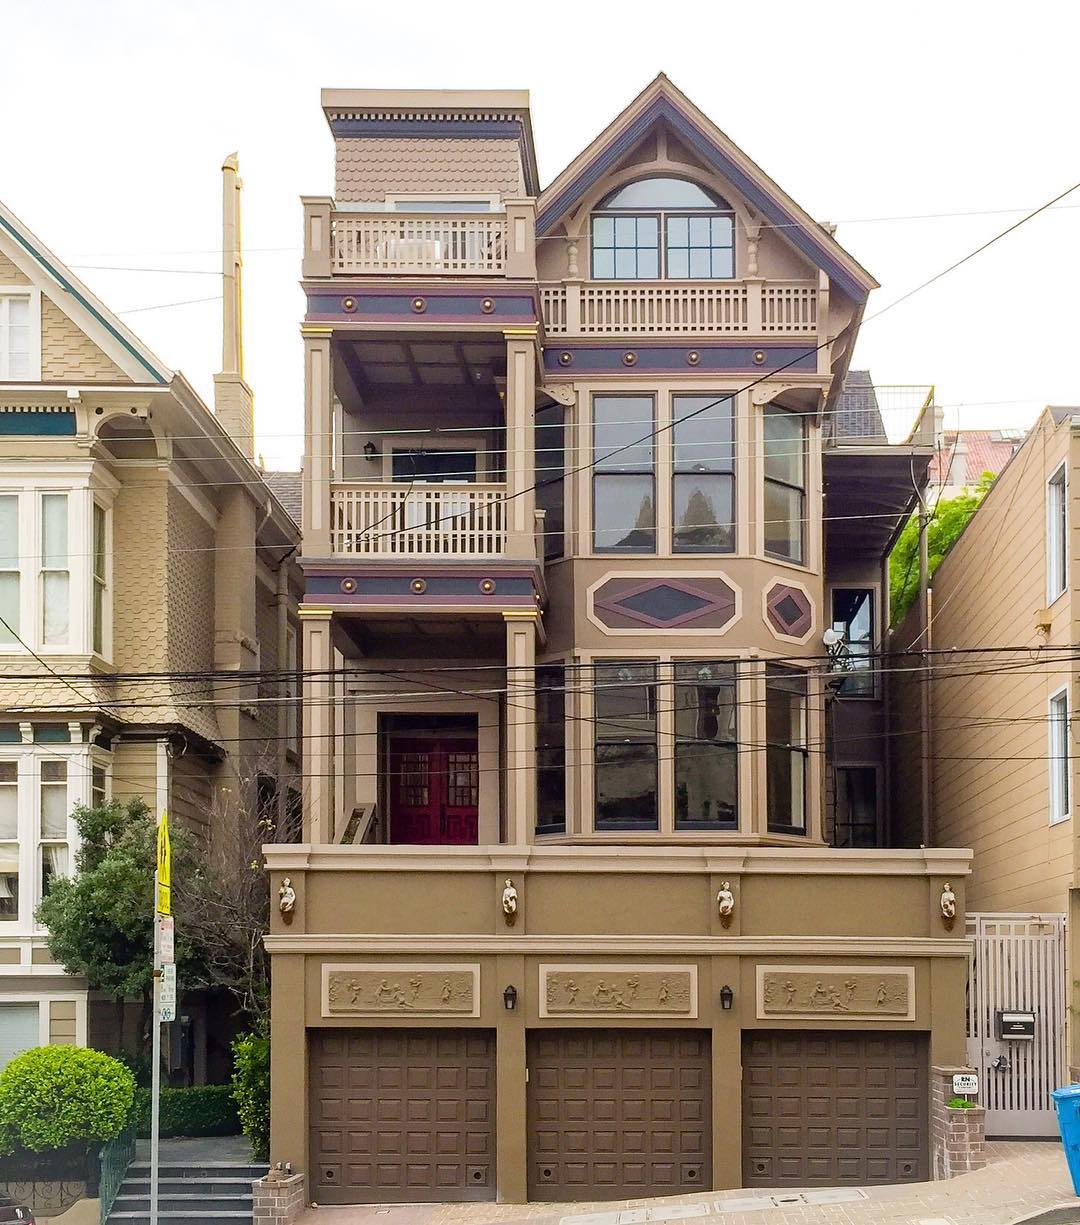 Tri-Level Stick Home in Pacific Heights, San Francisco. Photo by Instagram user @sanfranciscoexteriors